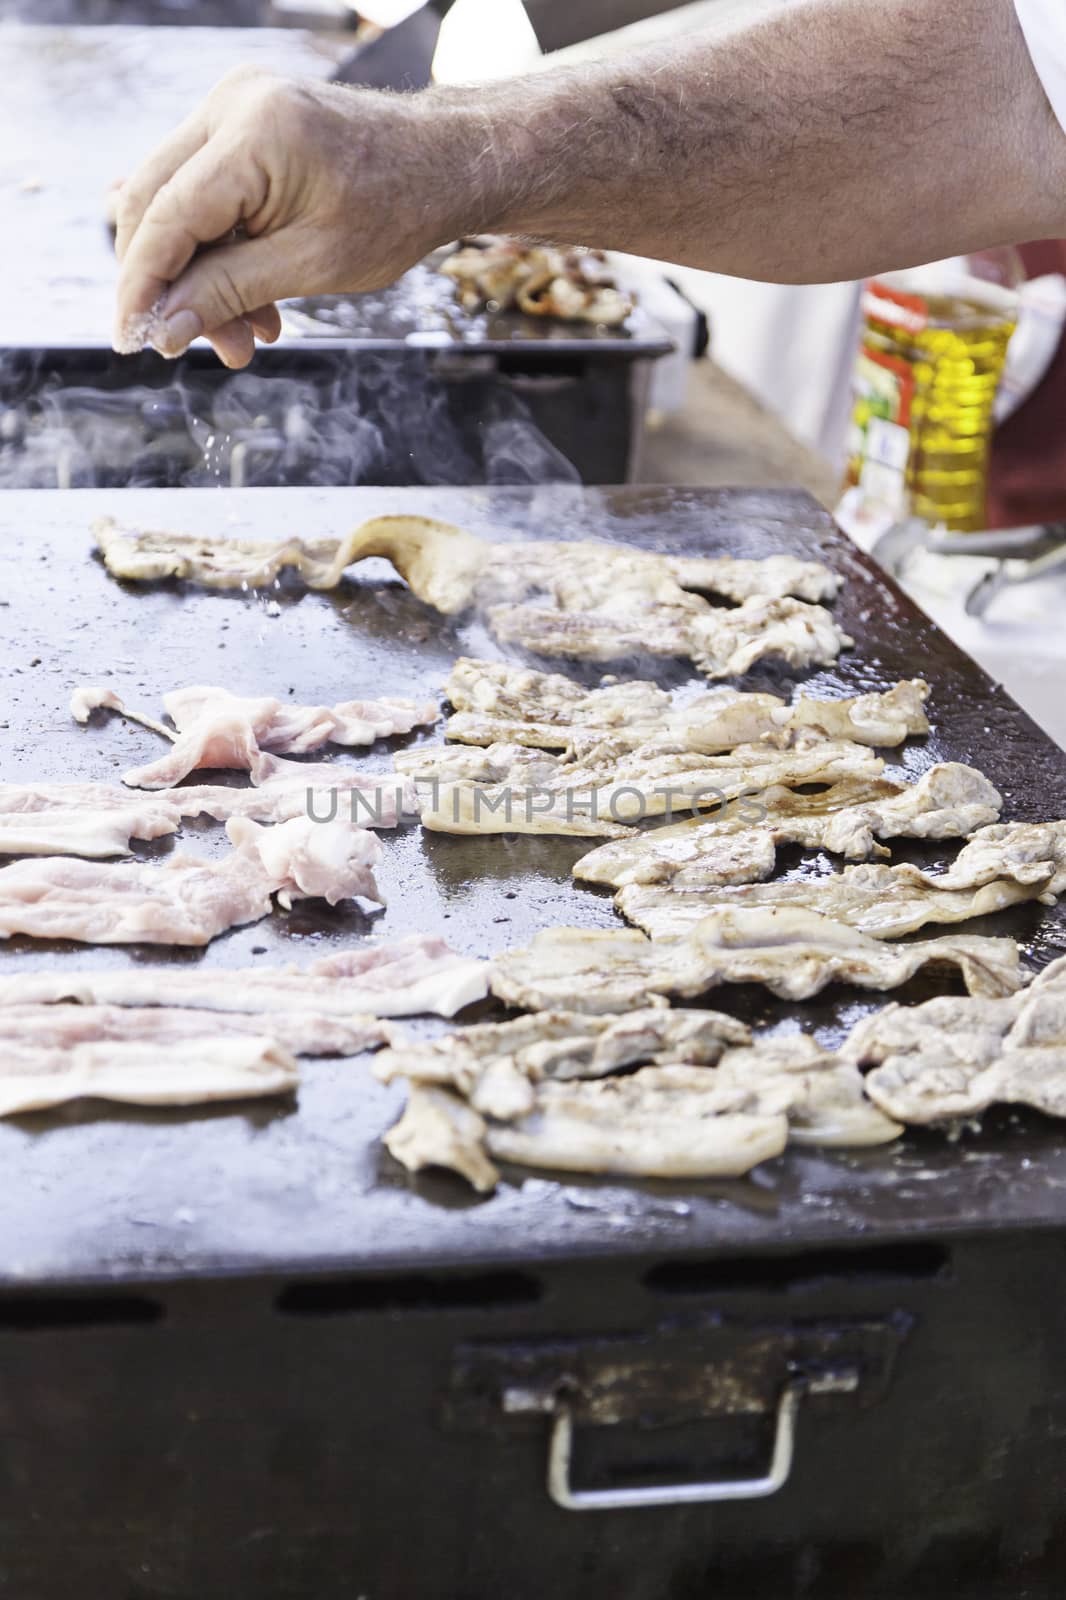 Frying bacon, pork detail a sarte frying, cooking in the street, holding
